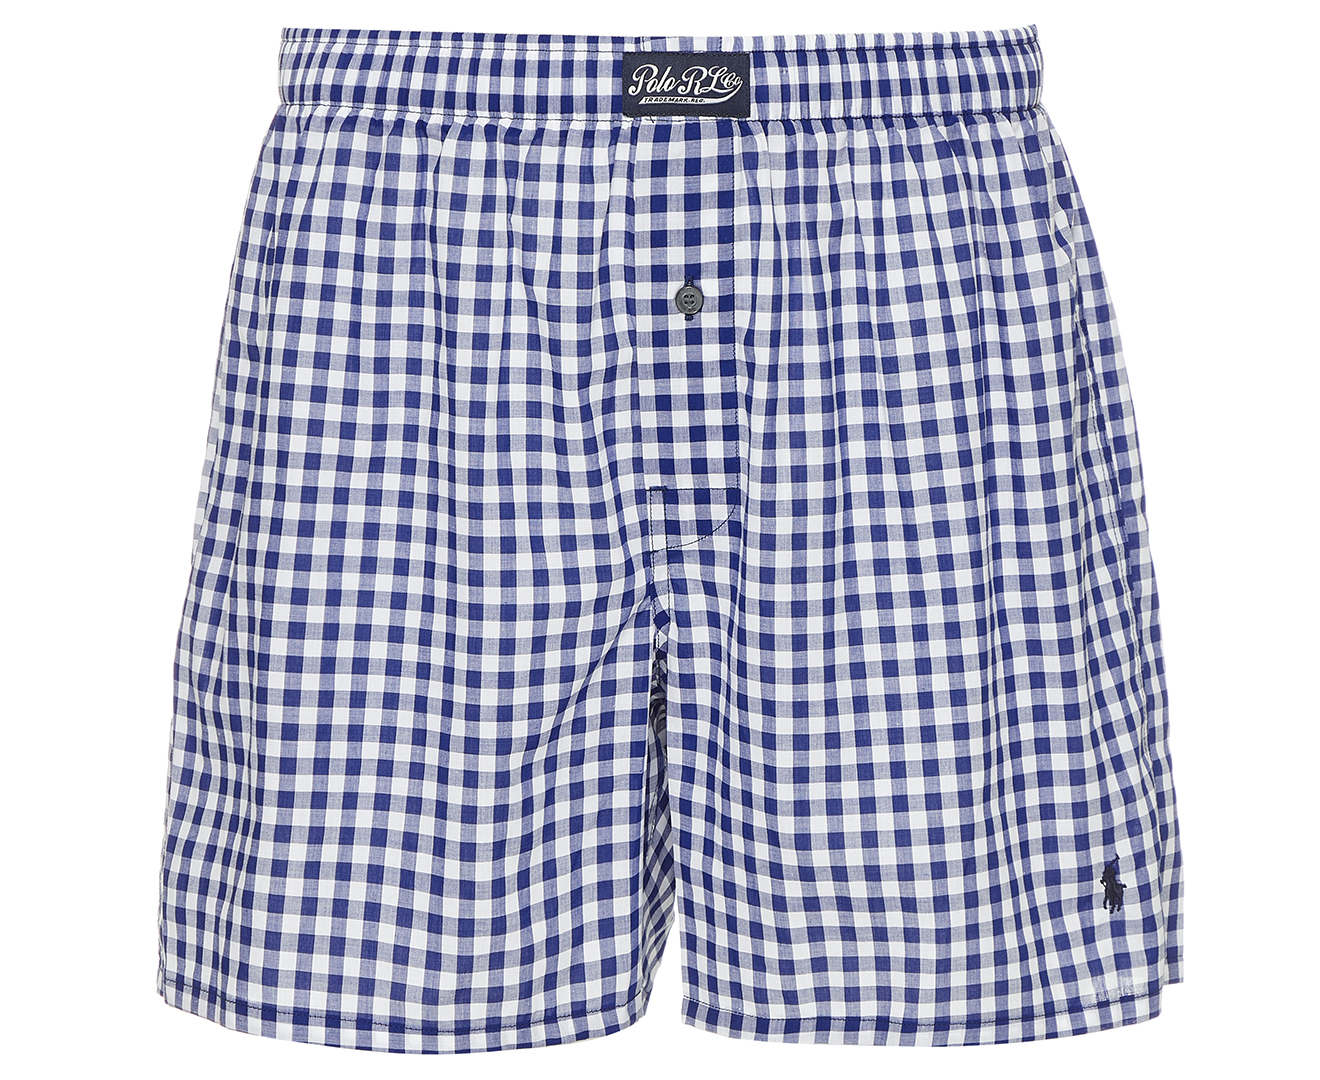 Polo Ralph Lauren Men's Classic Fit Yarn Dyed Woven Boxers - Plaid ...